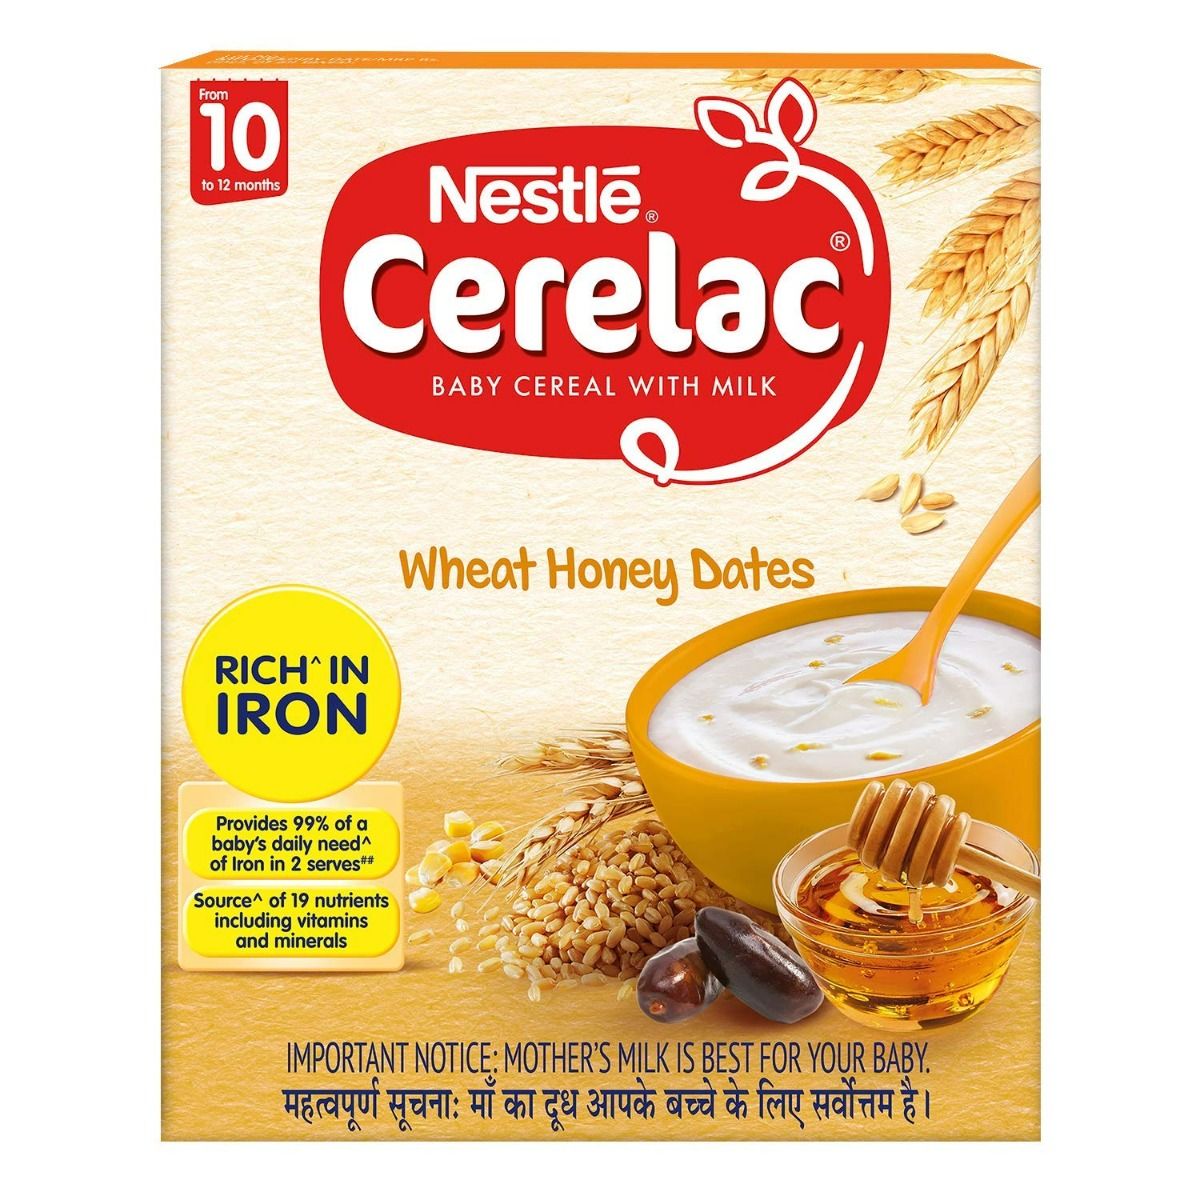 Nestle Cerelac Baby Cereal with Milk Wheat Honey Dates (From 10 to 12 Months) Powder, 300 gm Refill Pack, Pack of 1 